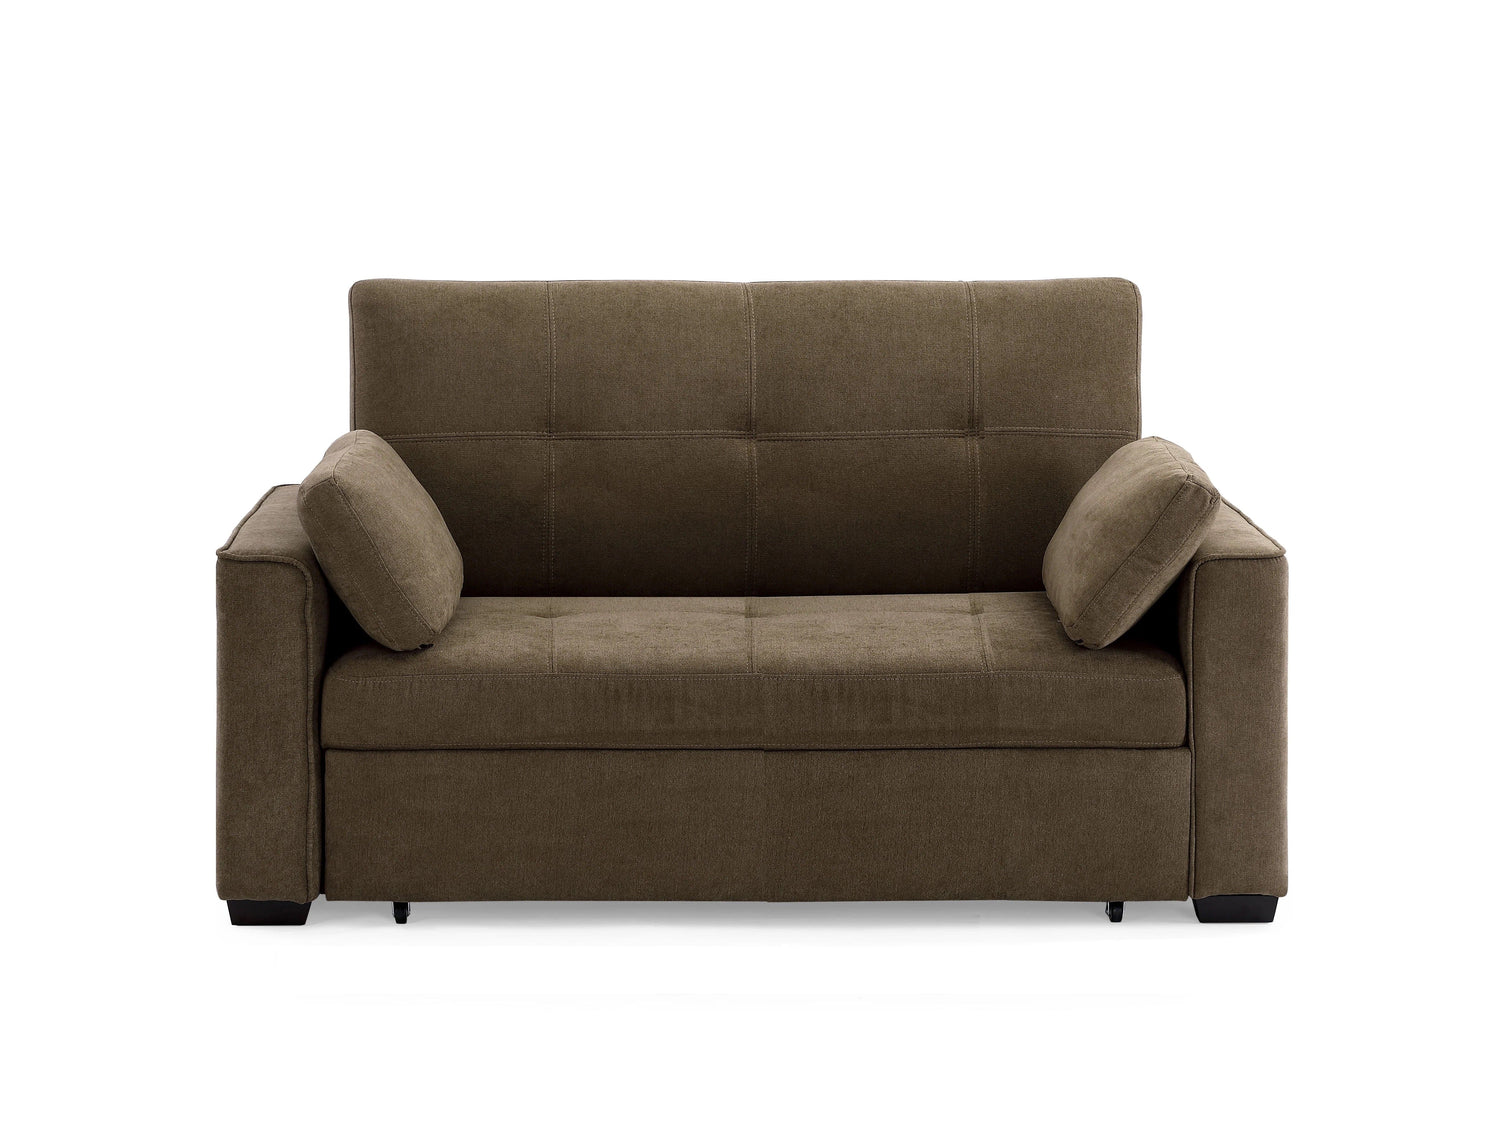 Night And Day Furniture Nantucket Full Sofa Bed - Cappuccino